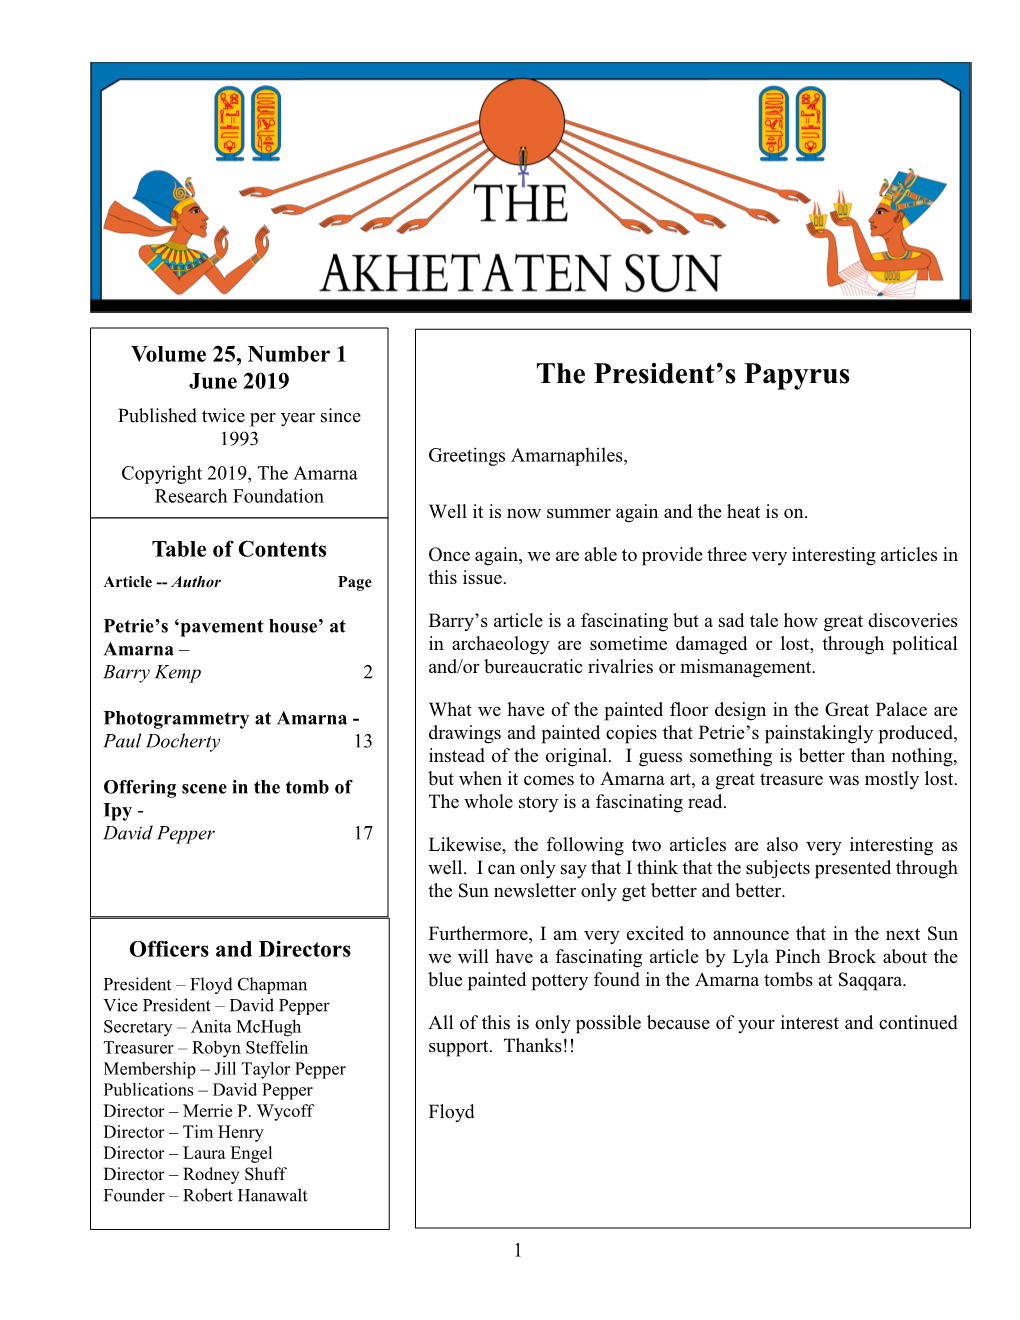 The President's Papyrus